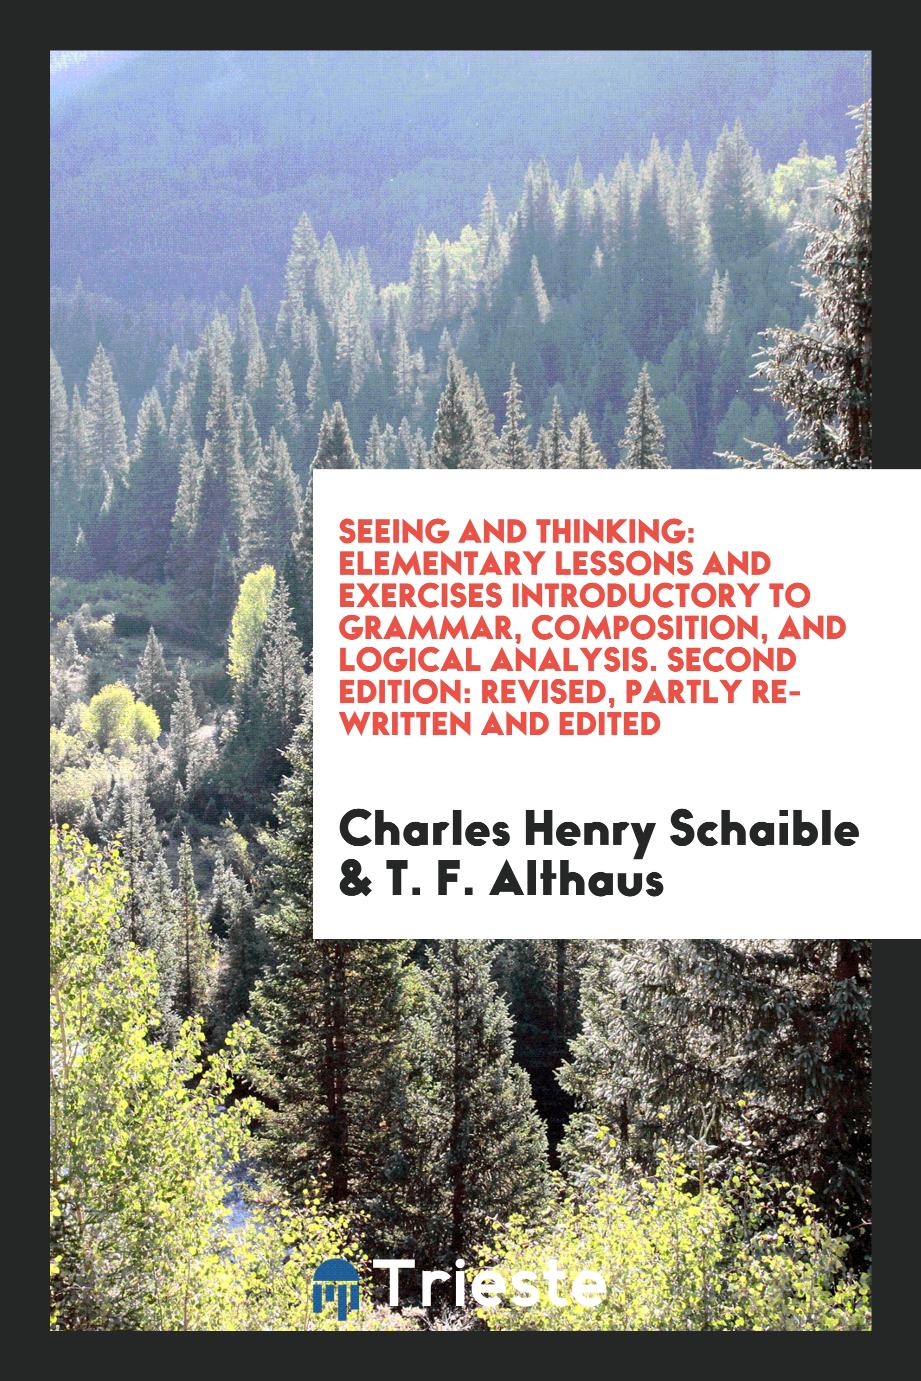 Seeing and Thinking: Elementary Lessons and Exercises Introductory to Grammar, Composition, and Logical Analysis. Second Edition: Revised, Partly Re-Written and Edited